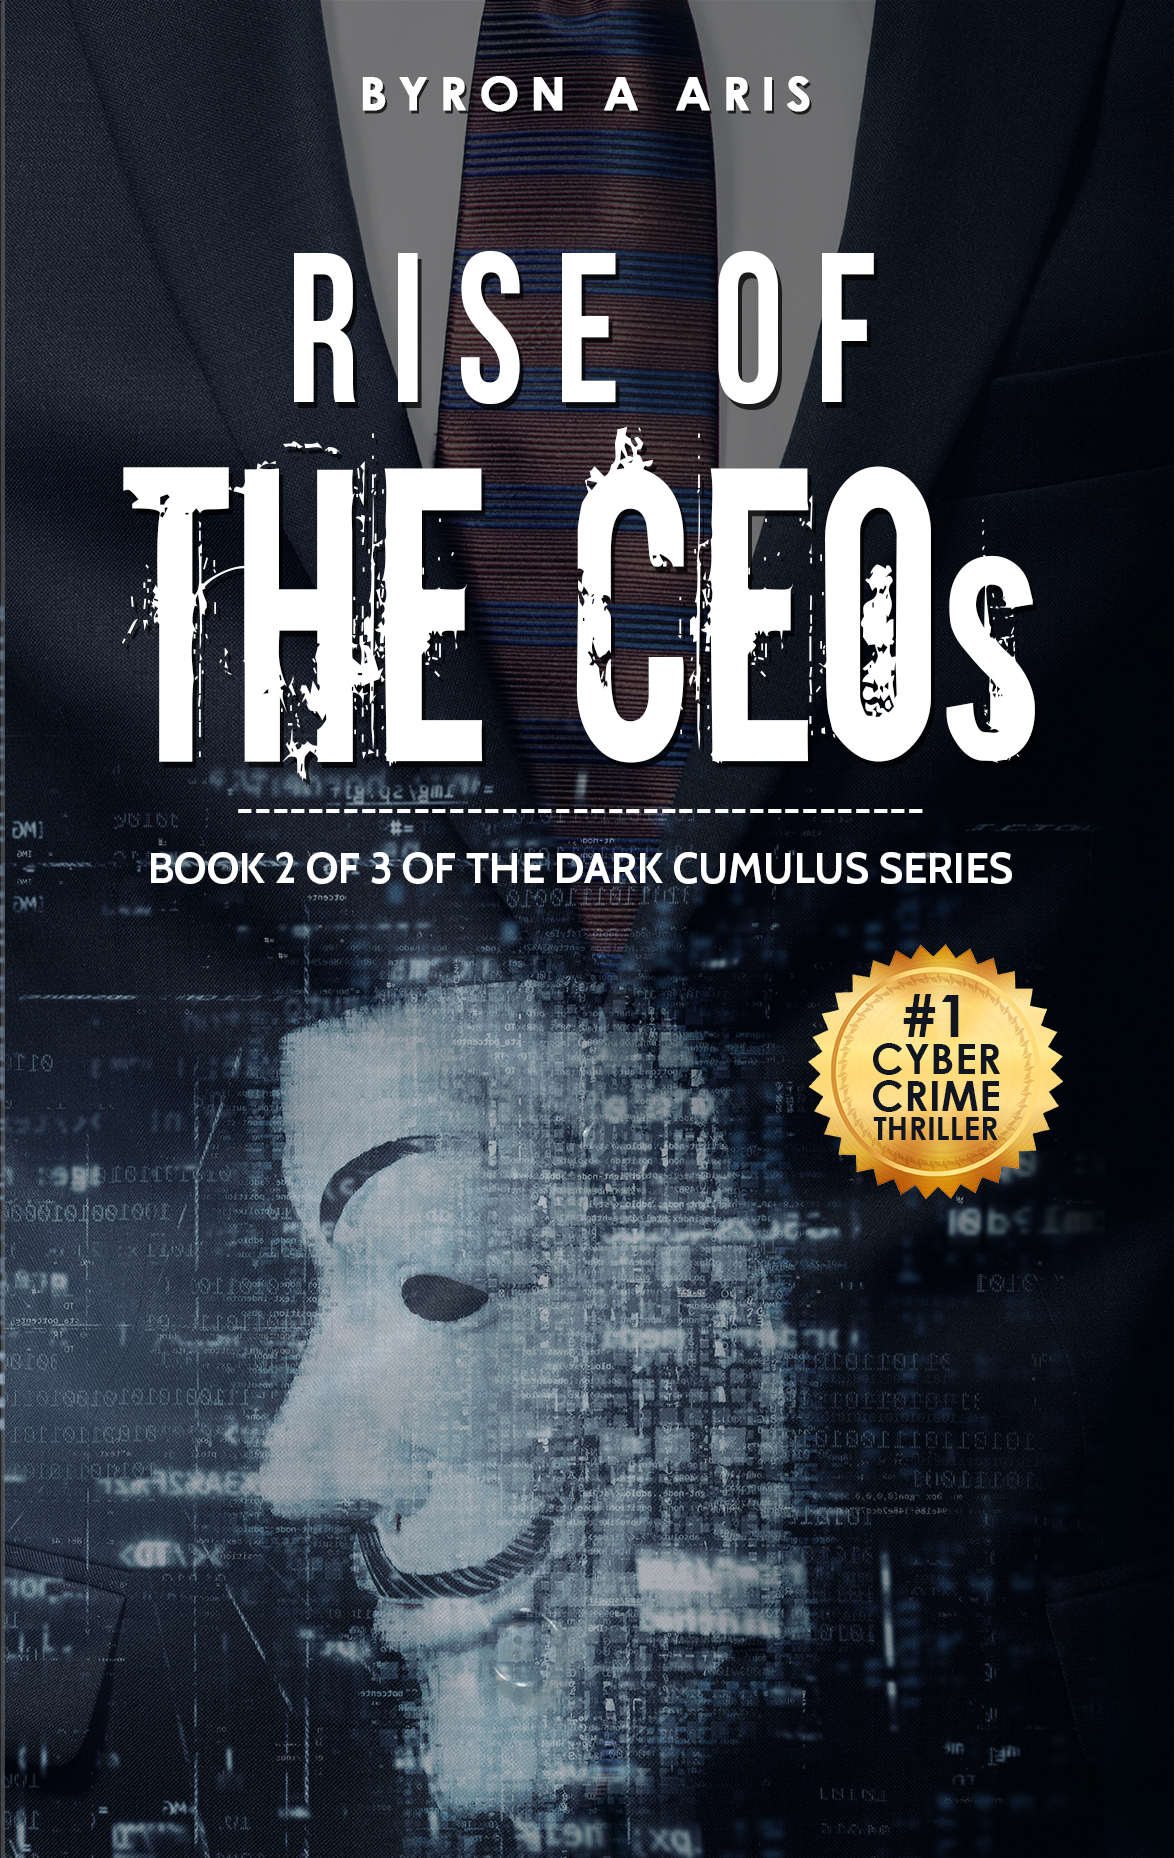 Esteemed Author & Cyber Security Expert Byron A Aris Announces Release of Second Book in Cyber Crime Thriller Series